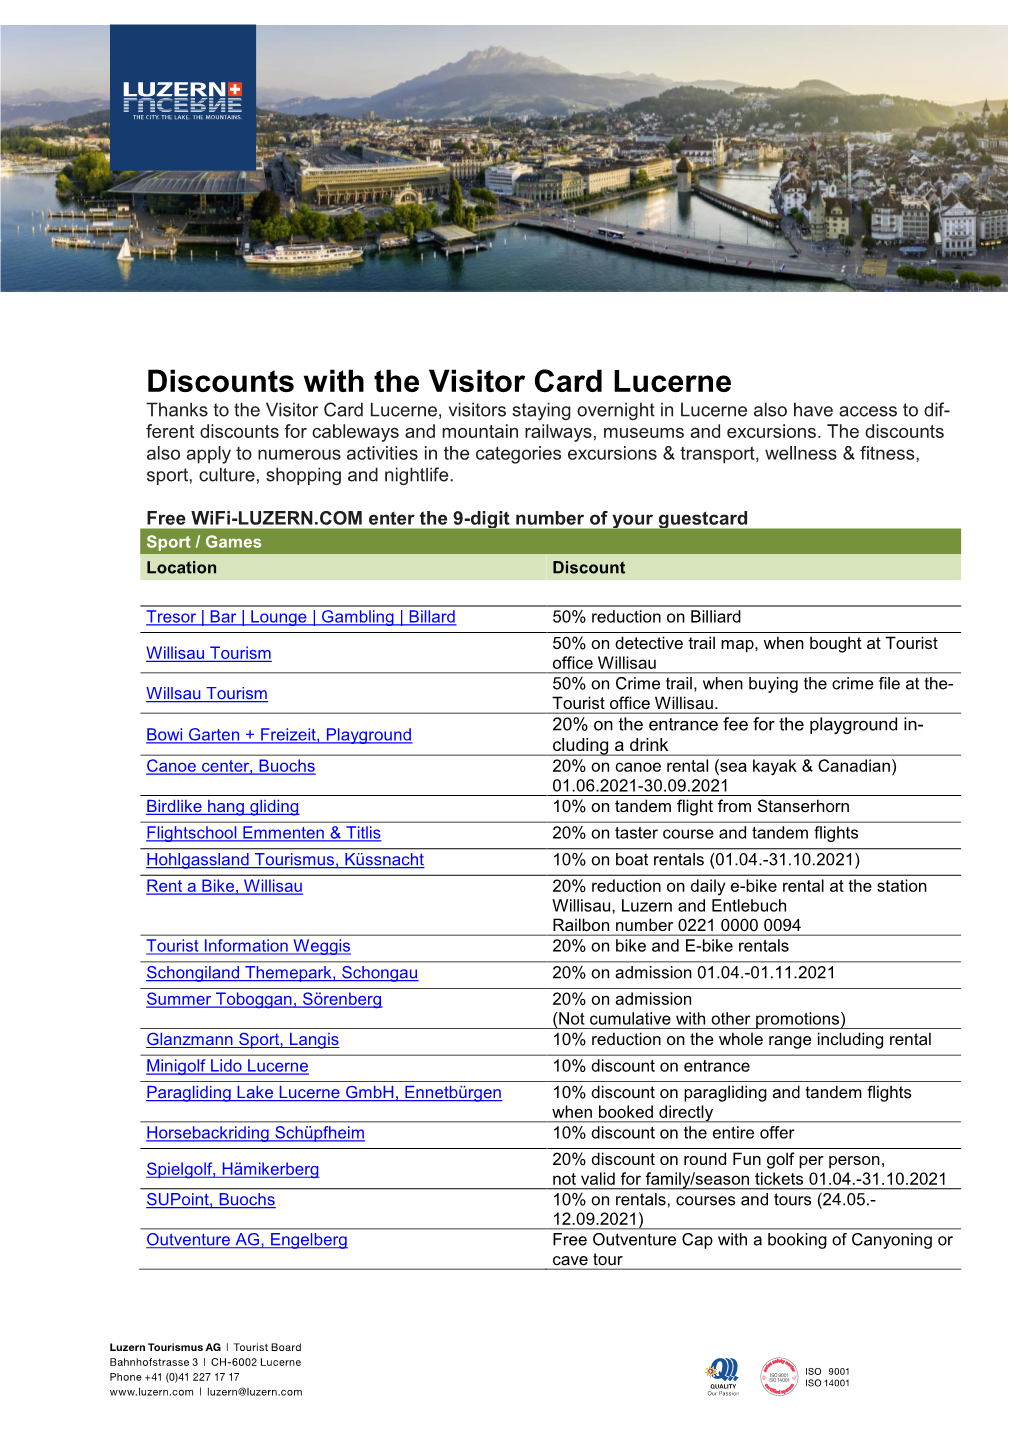 Discounts with the Visitor Card Lucerne